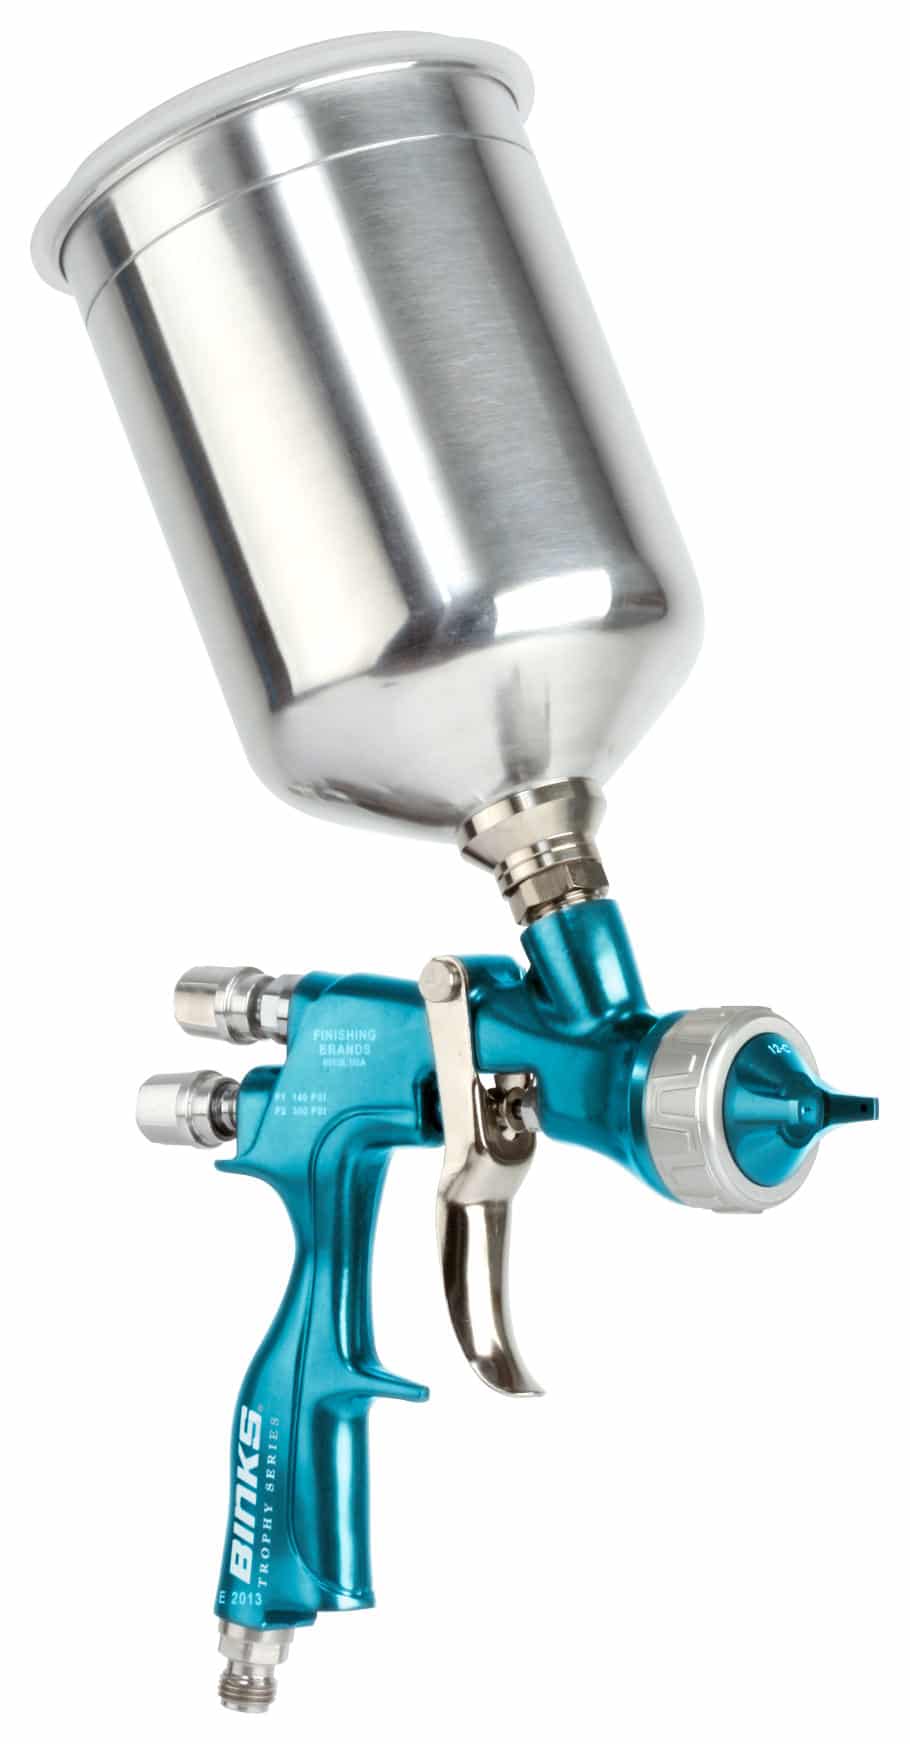 Binks 2466-HV1 Trophy Gravity Fed Spray Gun Value Pack includes 1.2, 1.4, and 1.8 Fluid Nozzle